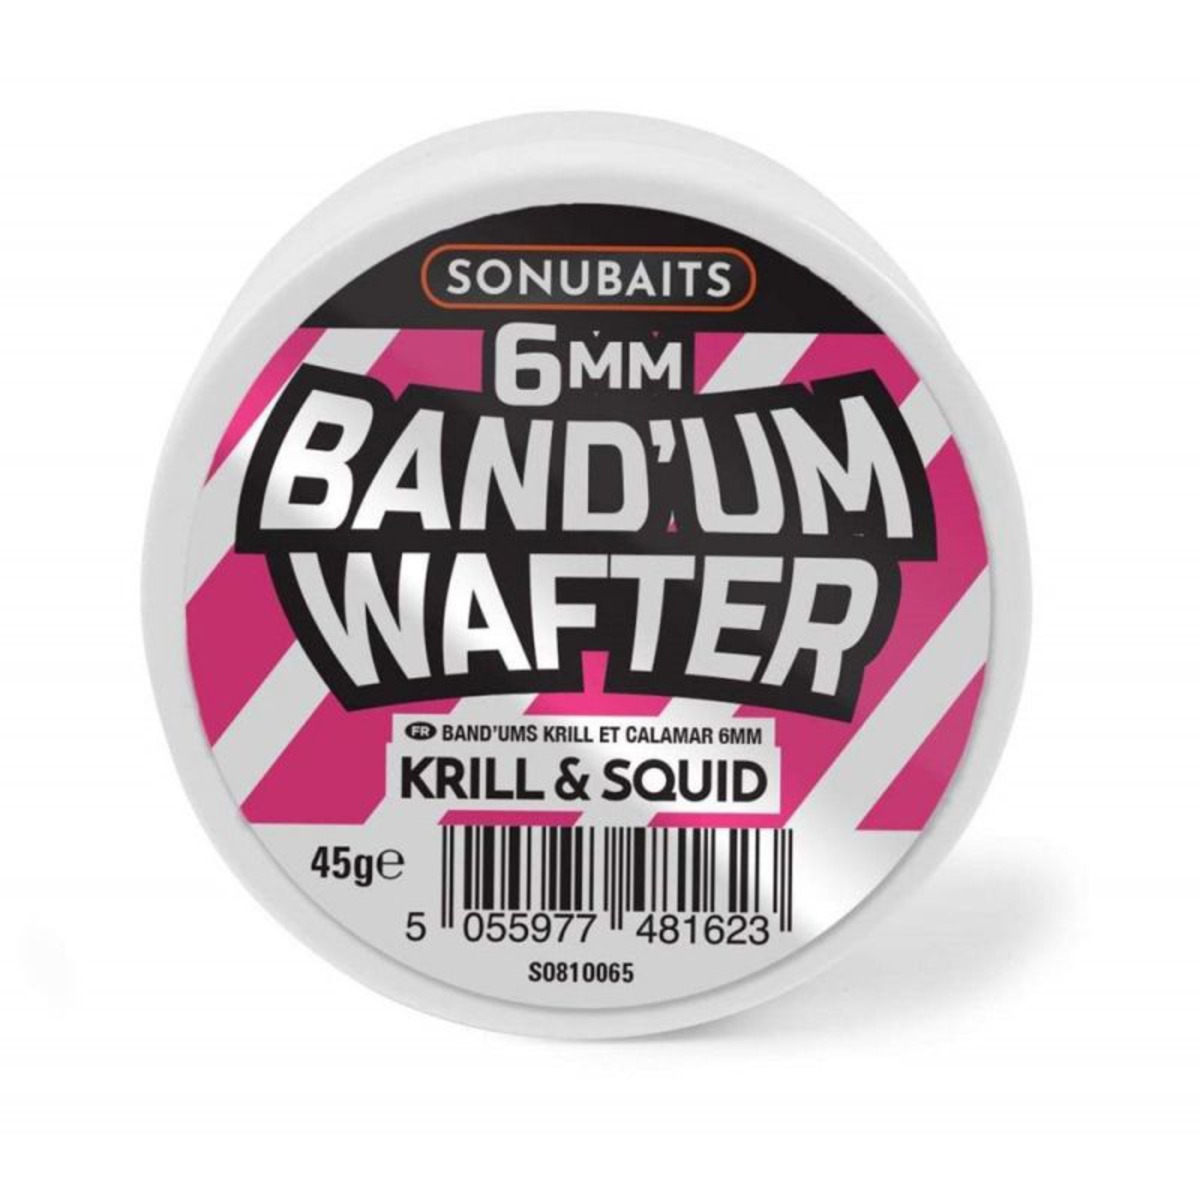 Sonubaits Band’um Wafters - 6 mm - Krill and Squid